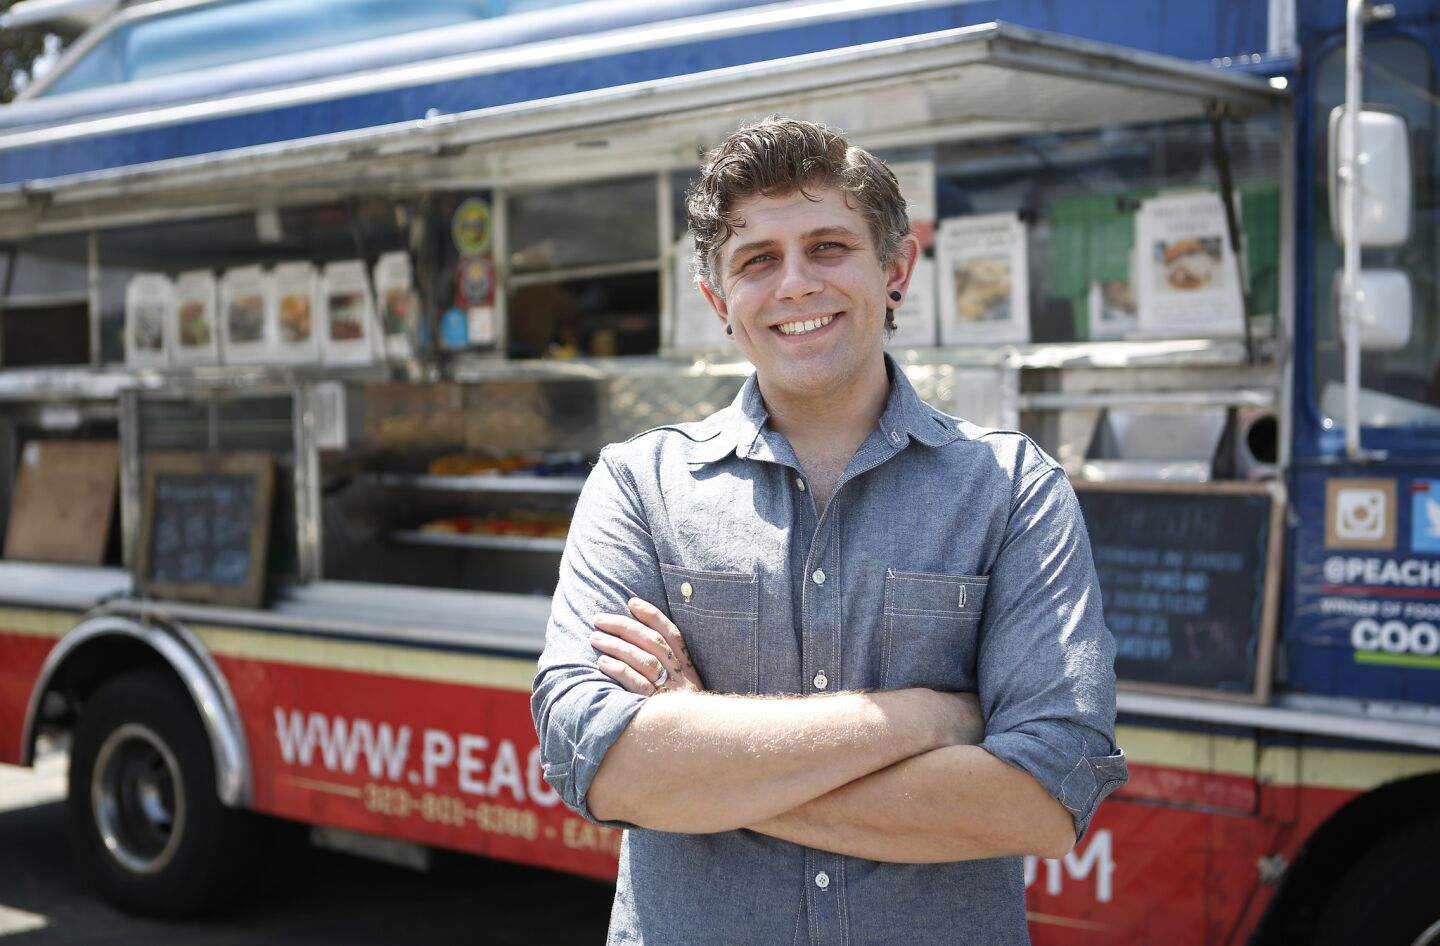 Run by chef Ryan Lamon, pictured here, Peaches' is a food truck specializing in Southern food.